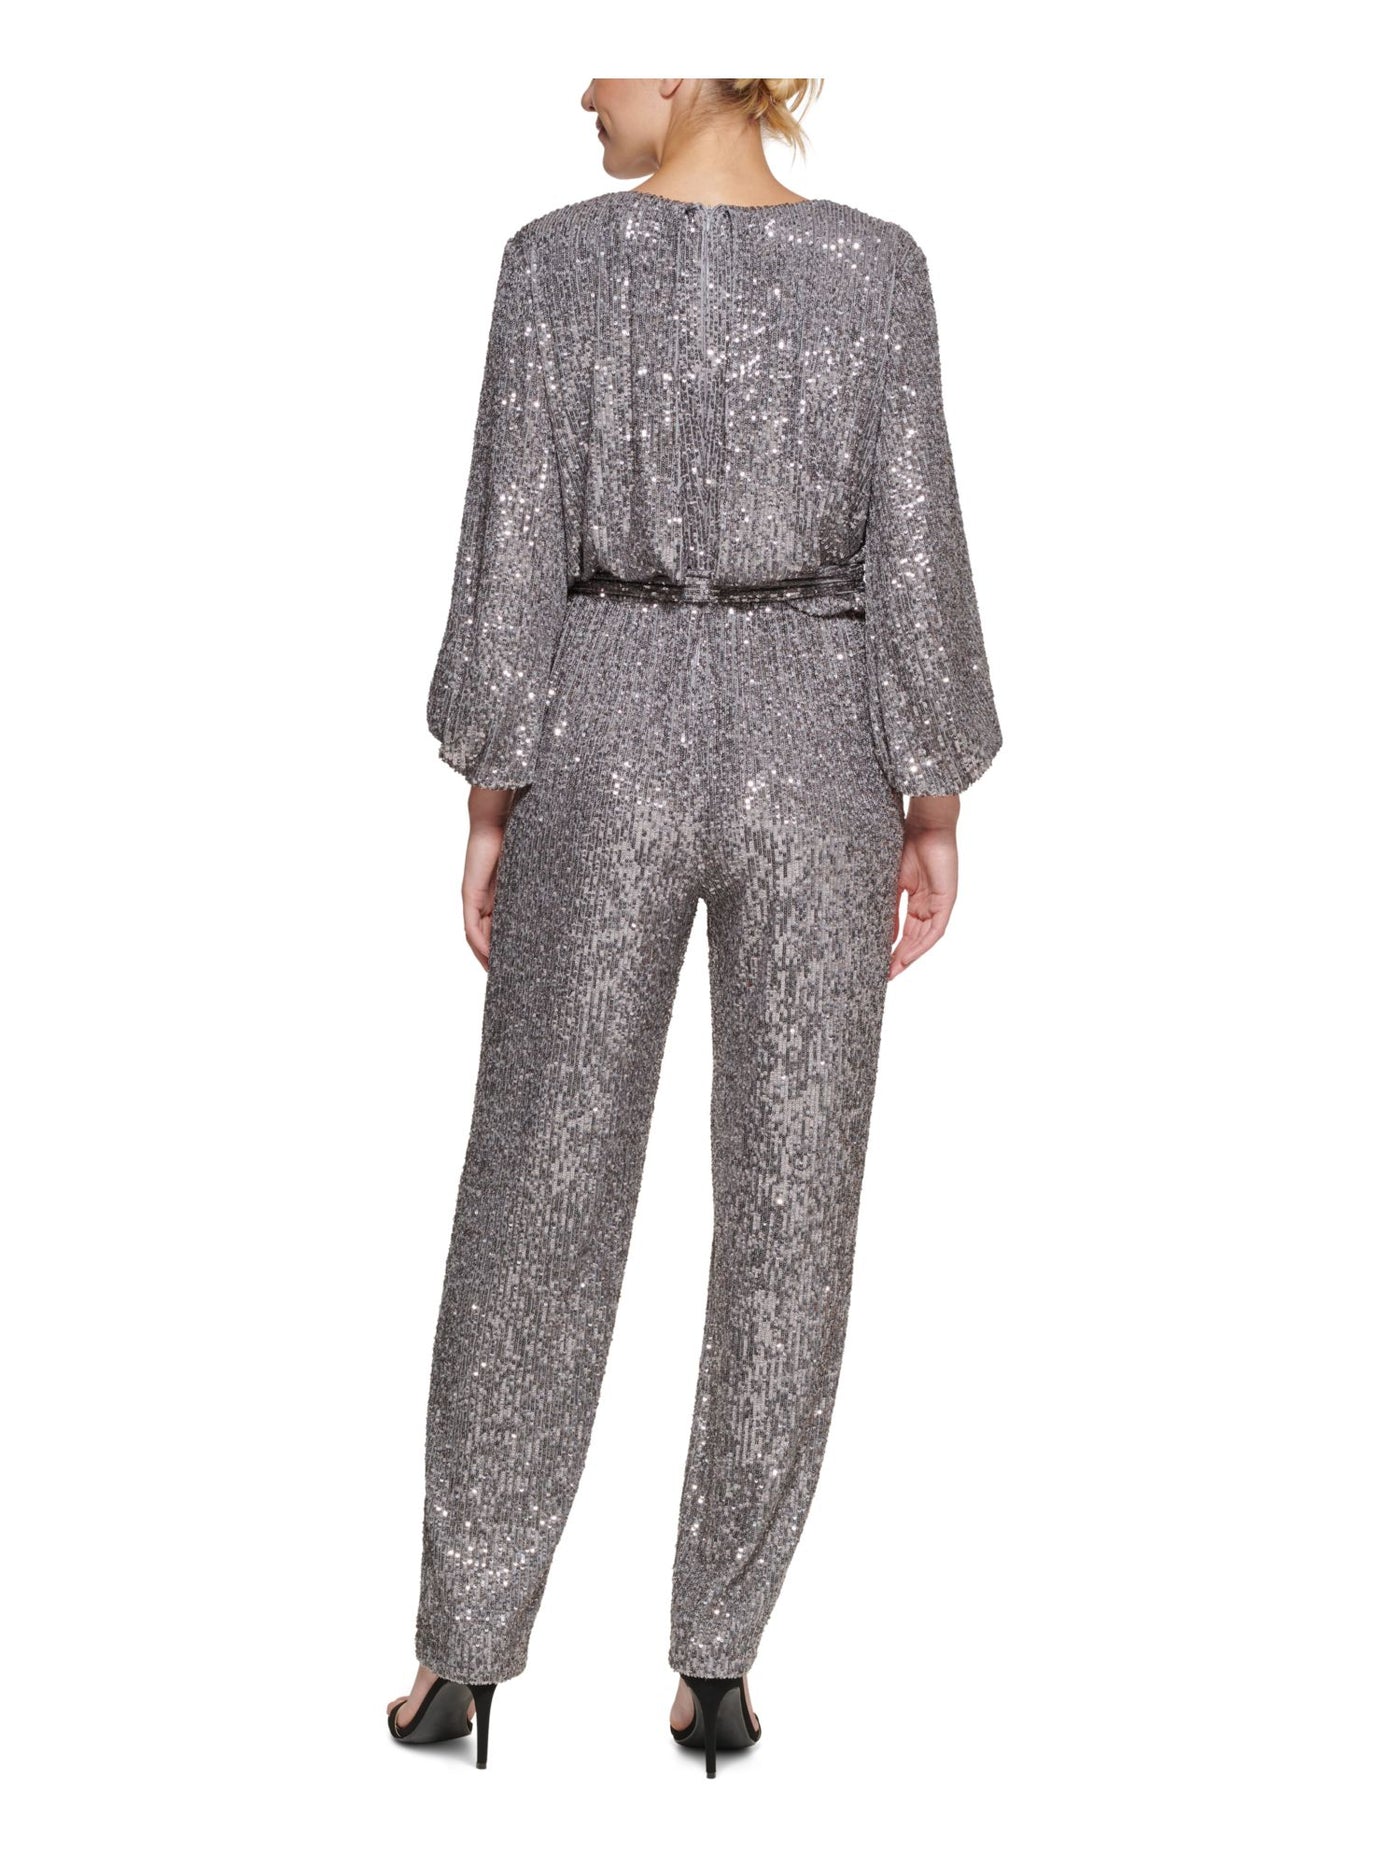 ELIZA J Womens Gray Stretch Sequined Zippered Belted Balloon Sleeve Surplice Neckline Evening Jumpsuit 2